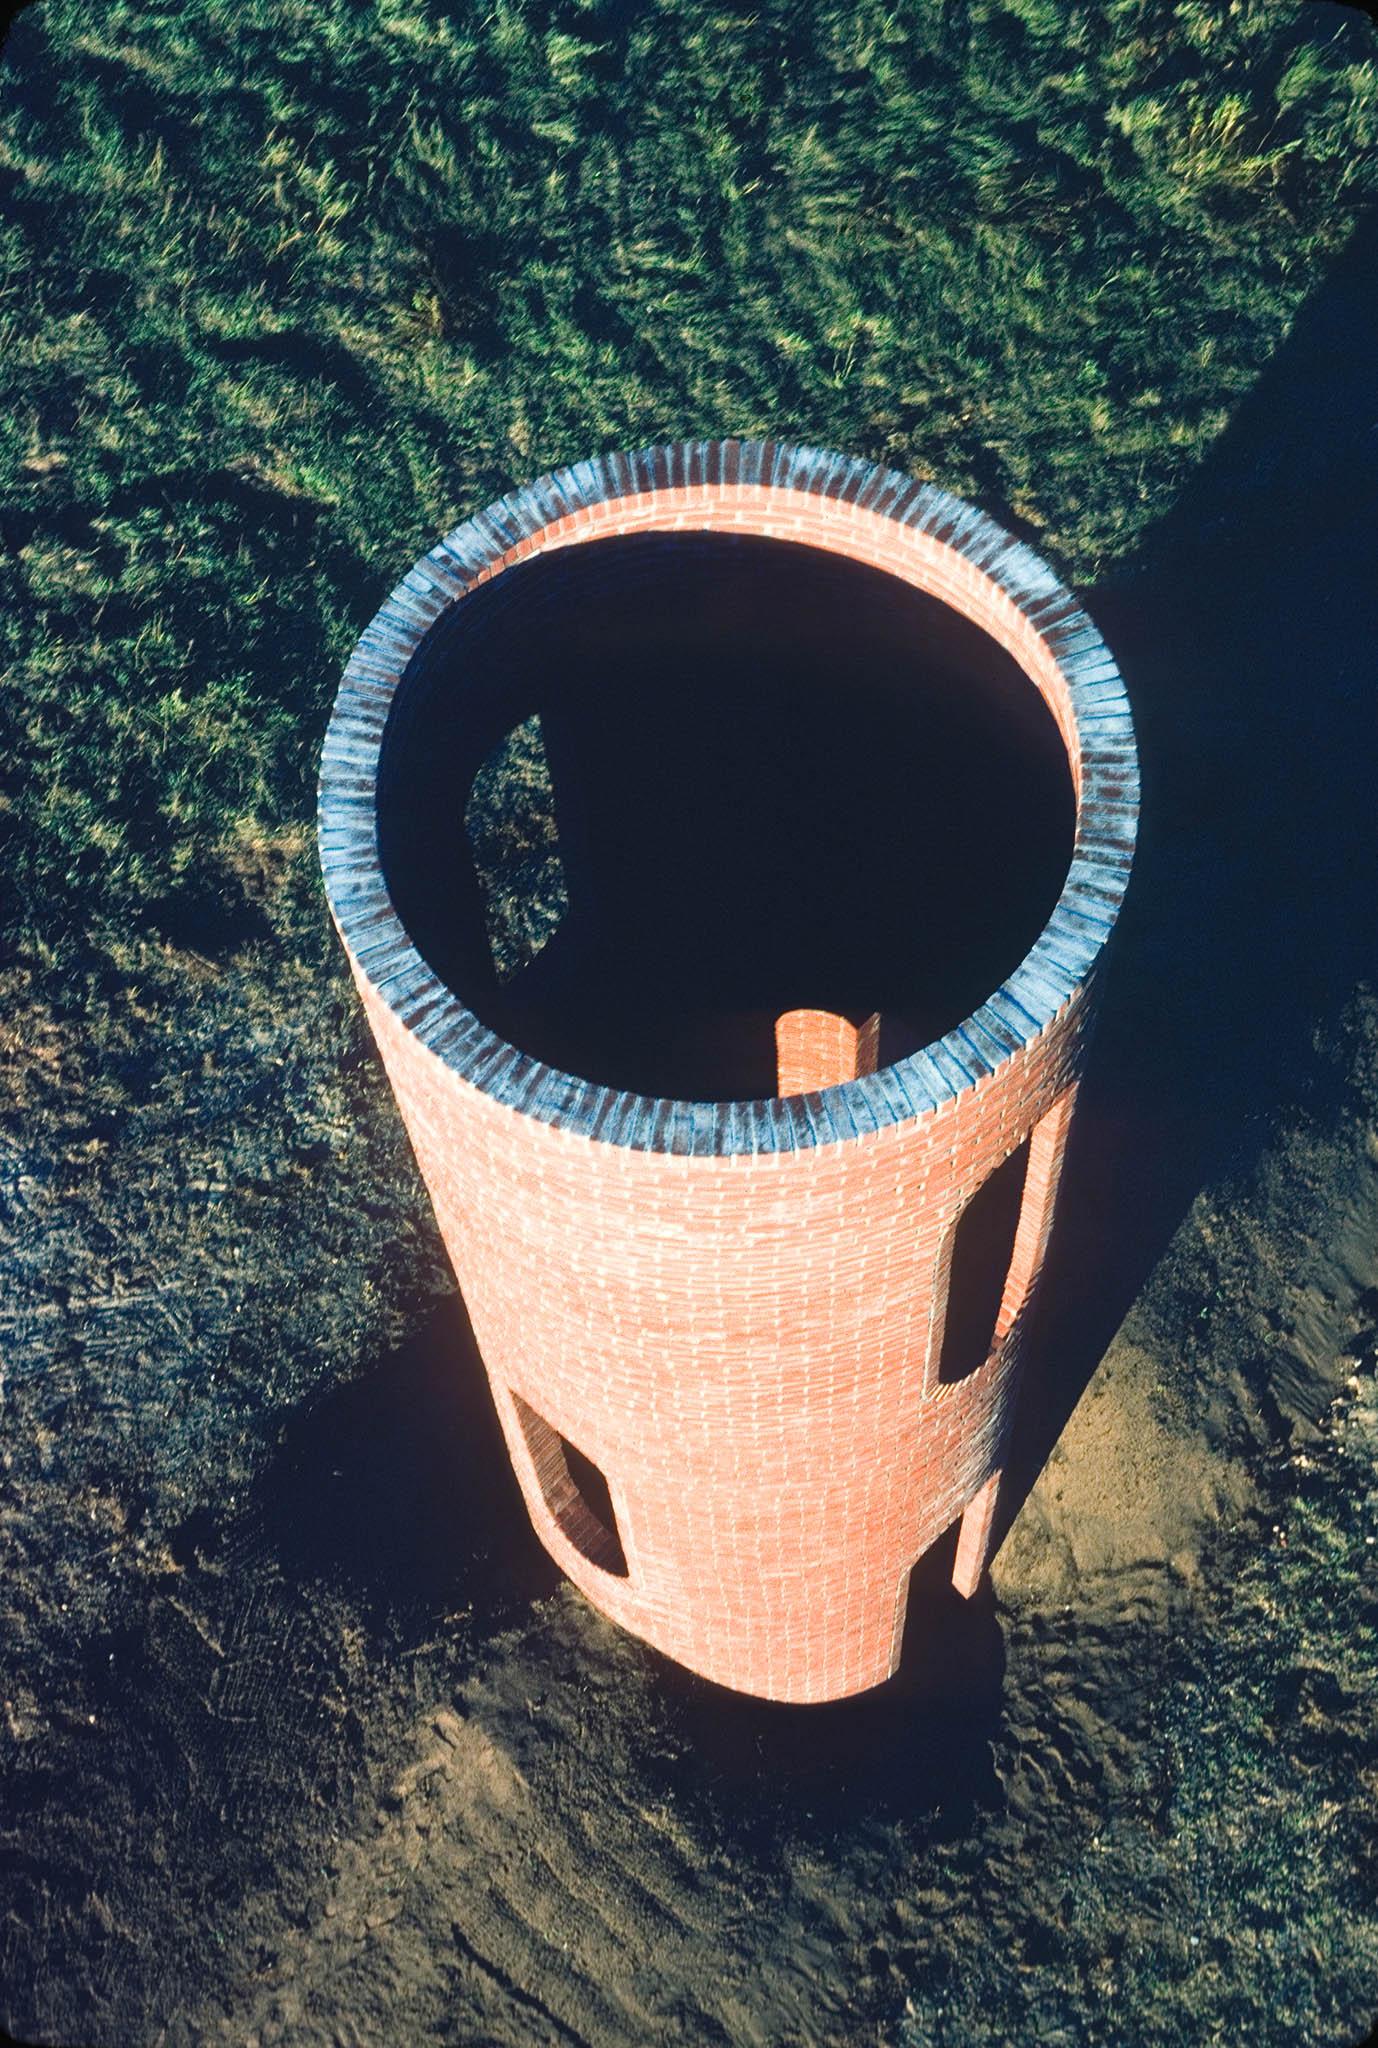 aerial image looking down on a tall circular brick structure with an open top